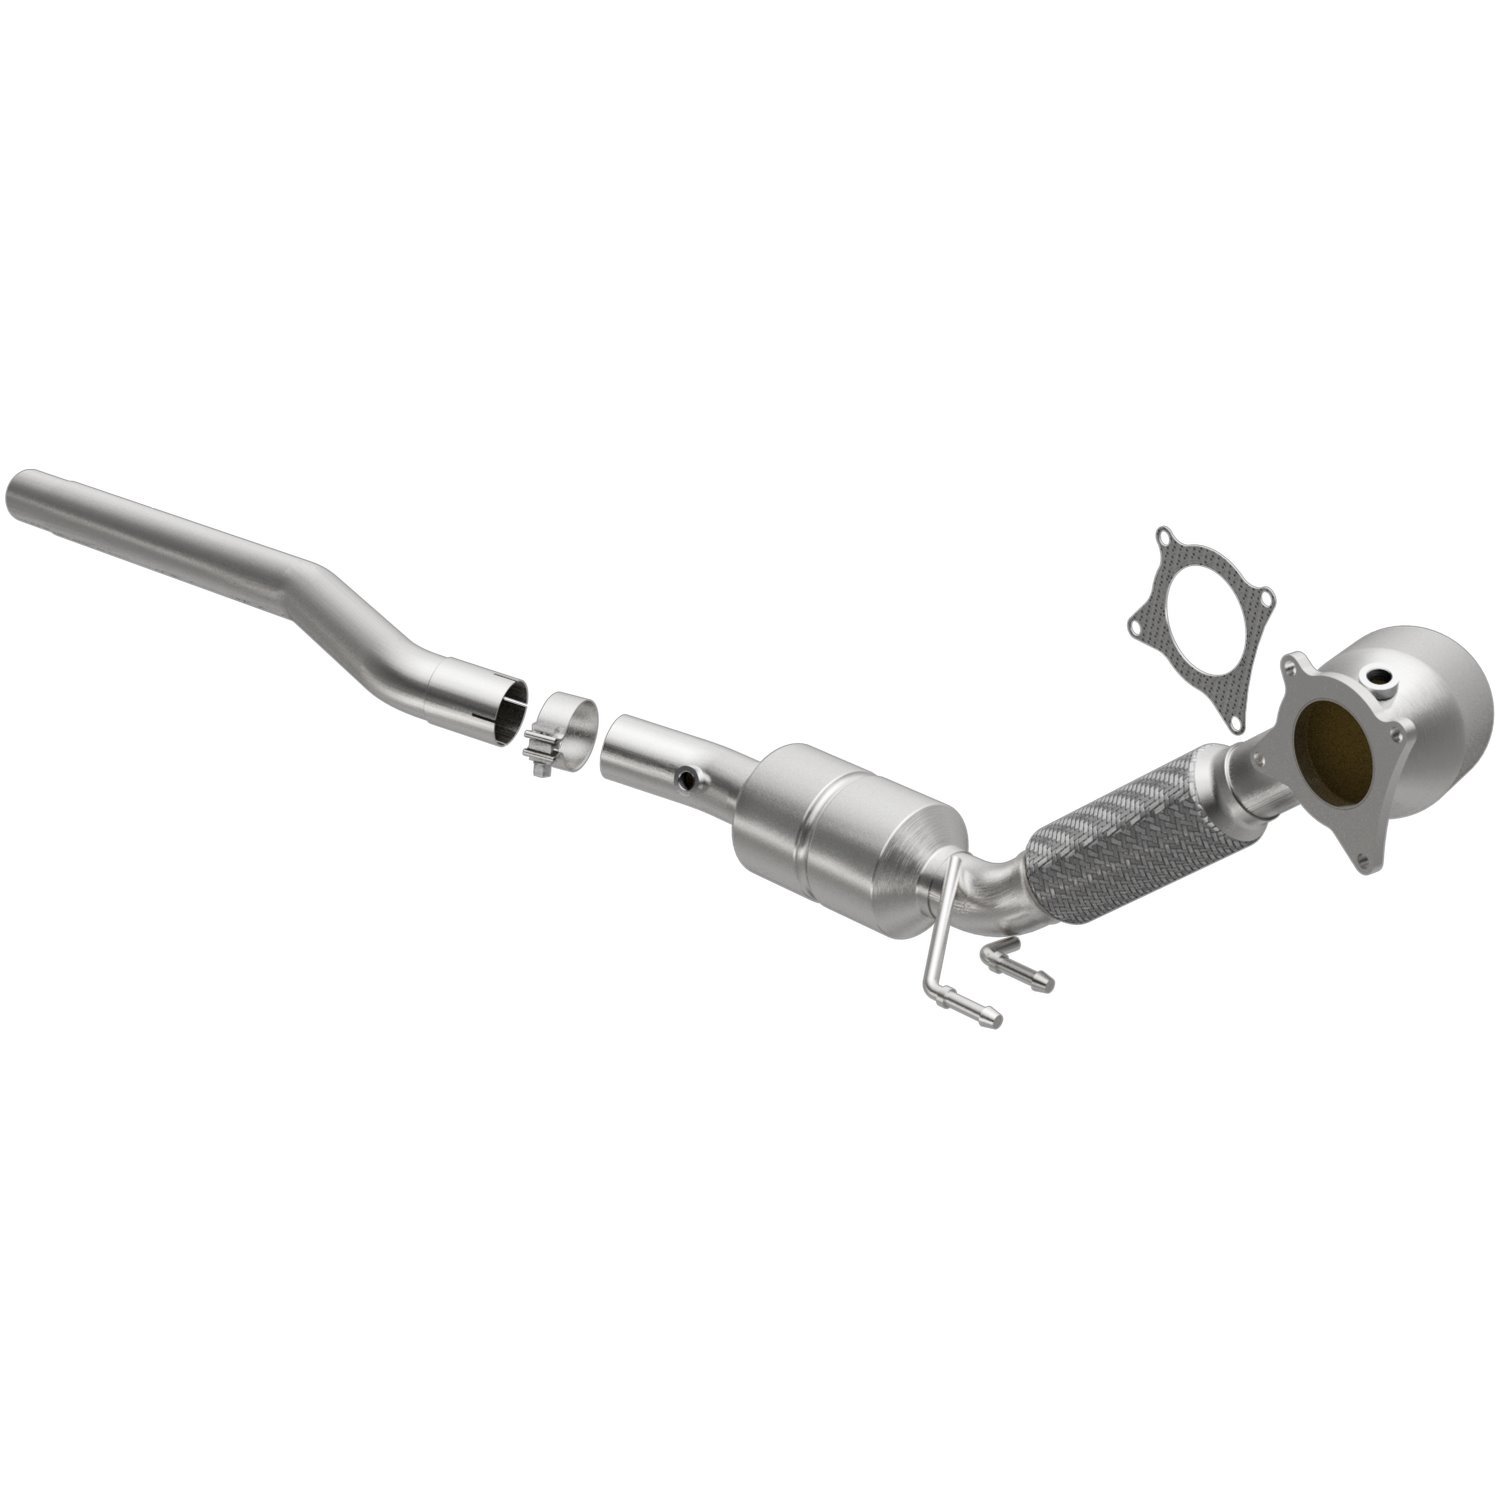 HM Grade Federal / EPA Compliant Direct-Fit Catalytic Converter 24191